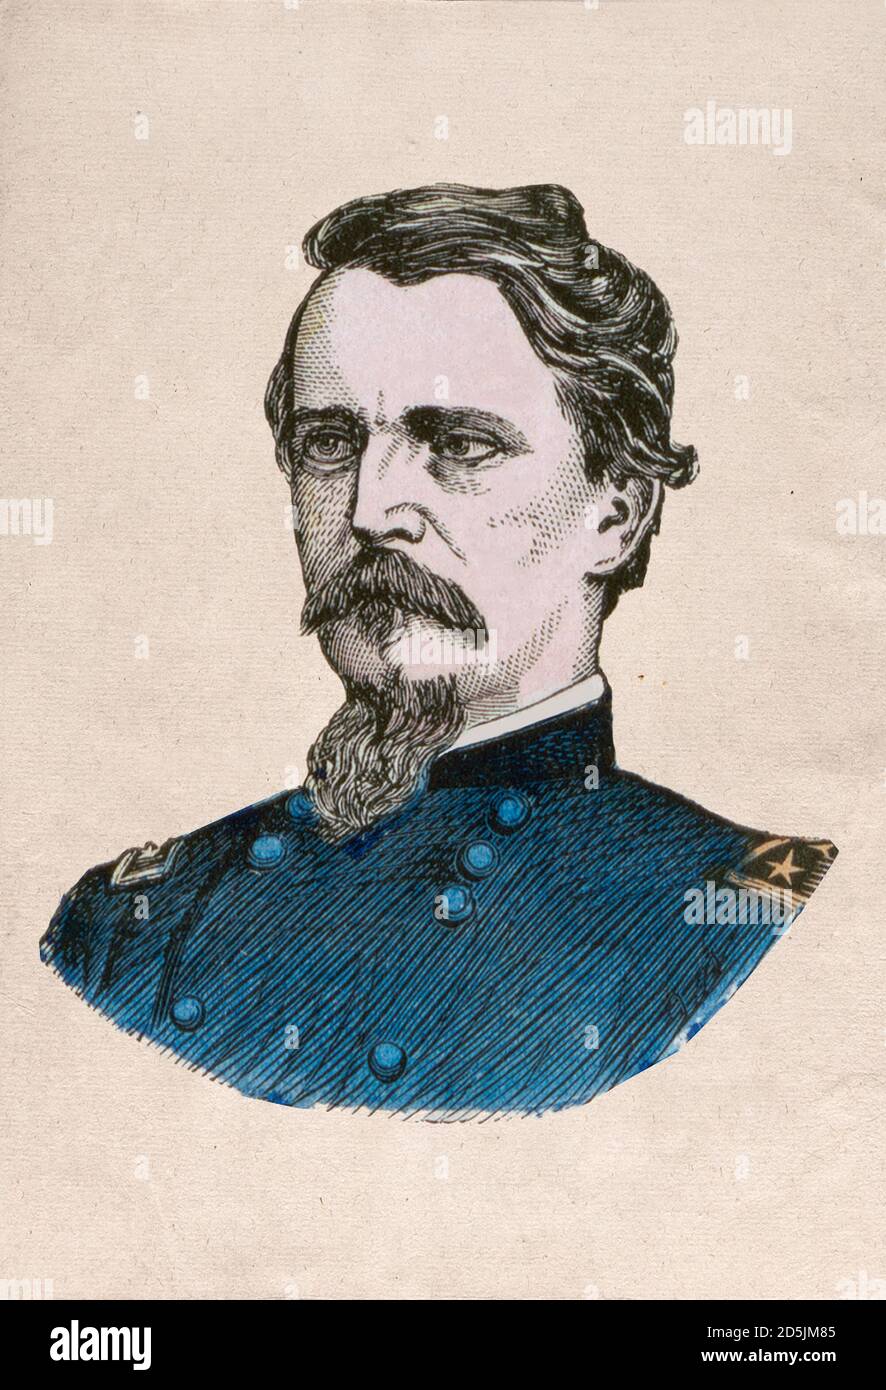 Portrait of general Hancock. Winfield Scott Hancock (1824 – 1886) was a United States Army officer and the Democratic nominee for President of the Uni Stock Photo